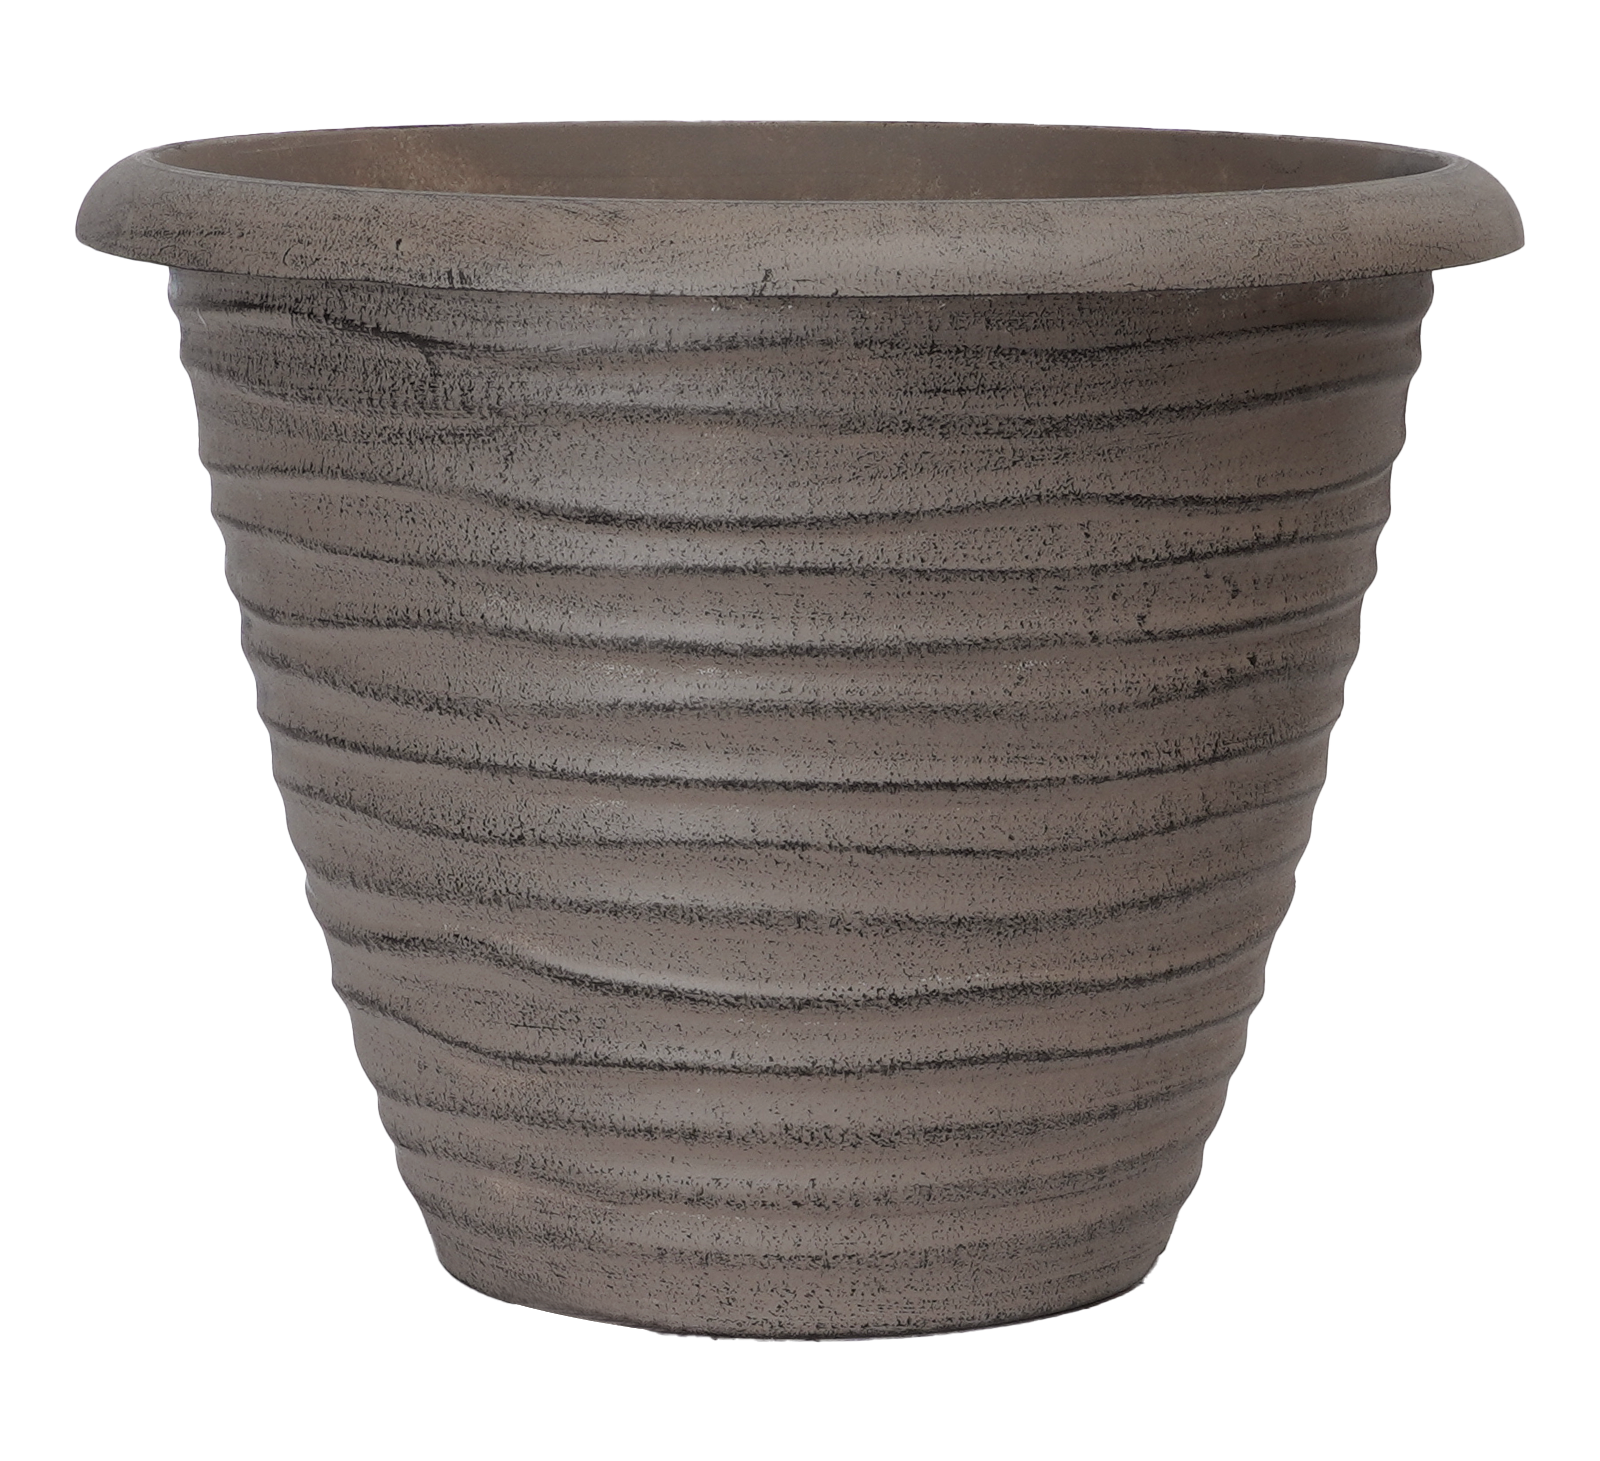 12" Dune Planter Shaded Taupe - 35 per case